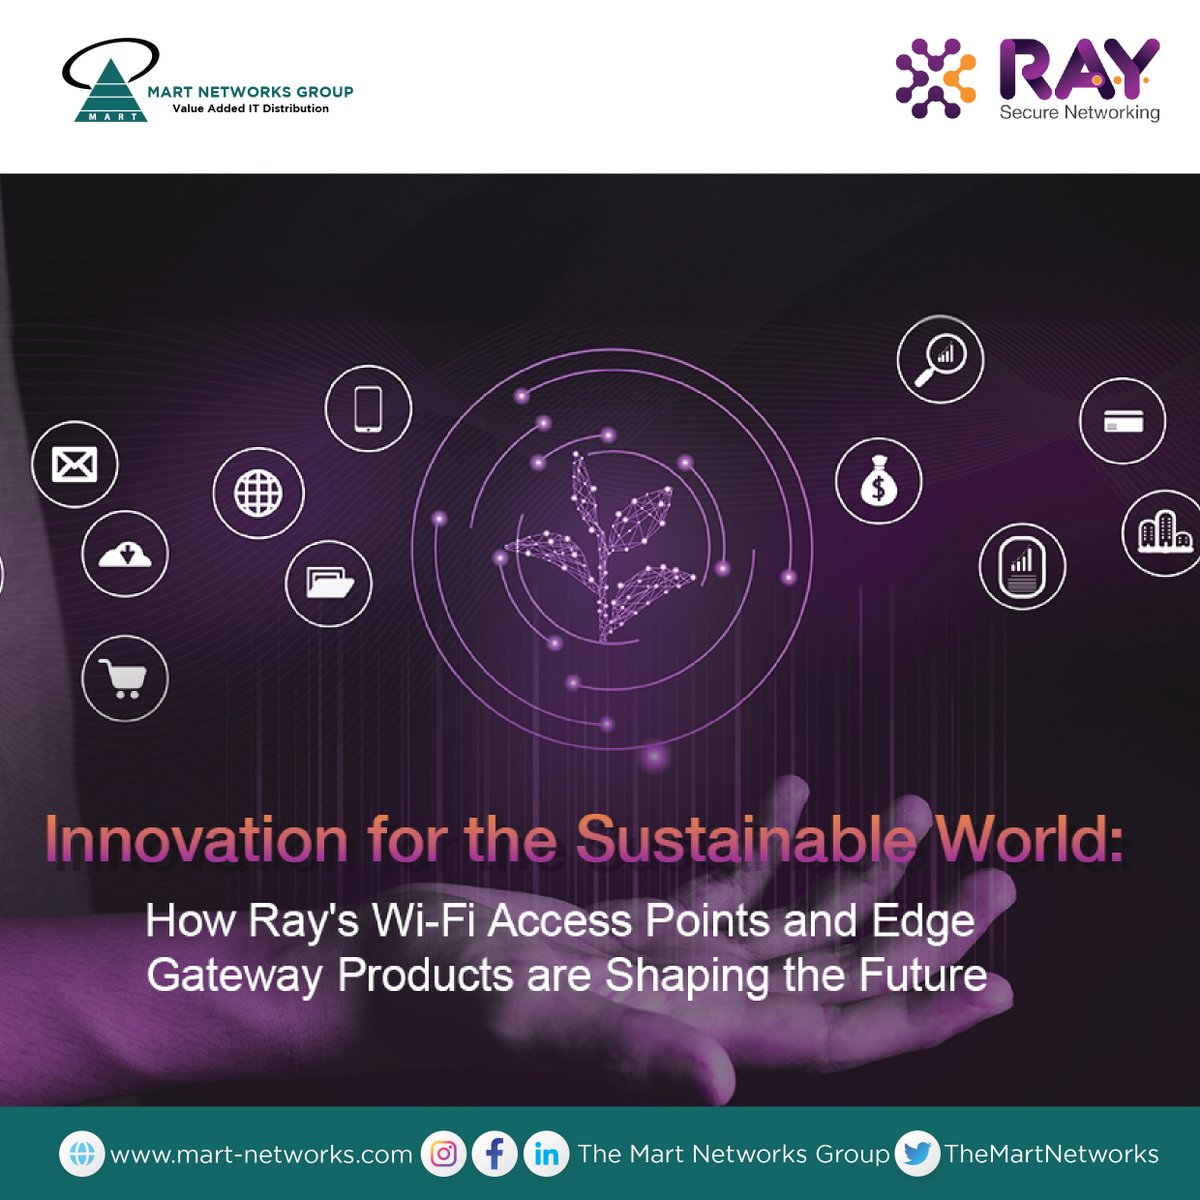 Ray's Future: 

Read More : ray.life

Contact Us For More Inquires and Purchase: mart-networks.com/contact-us

#themartnetworksgroup #awardwinningdistributors #sustainability #sustainabledevelopment #sustainableinnovation #futuretech #innovation #sustainabilitymatters